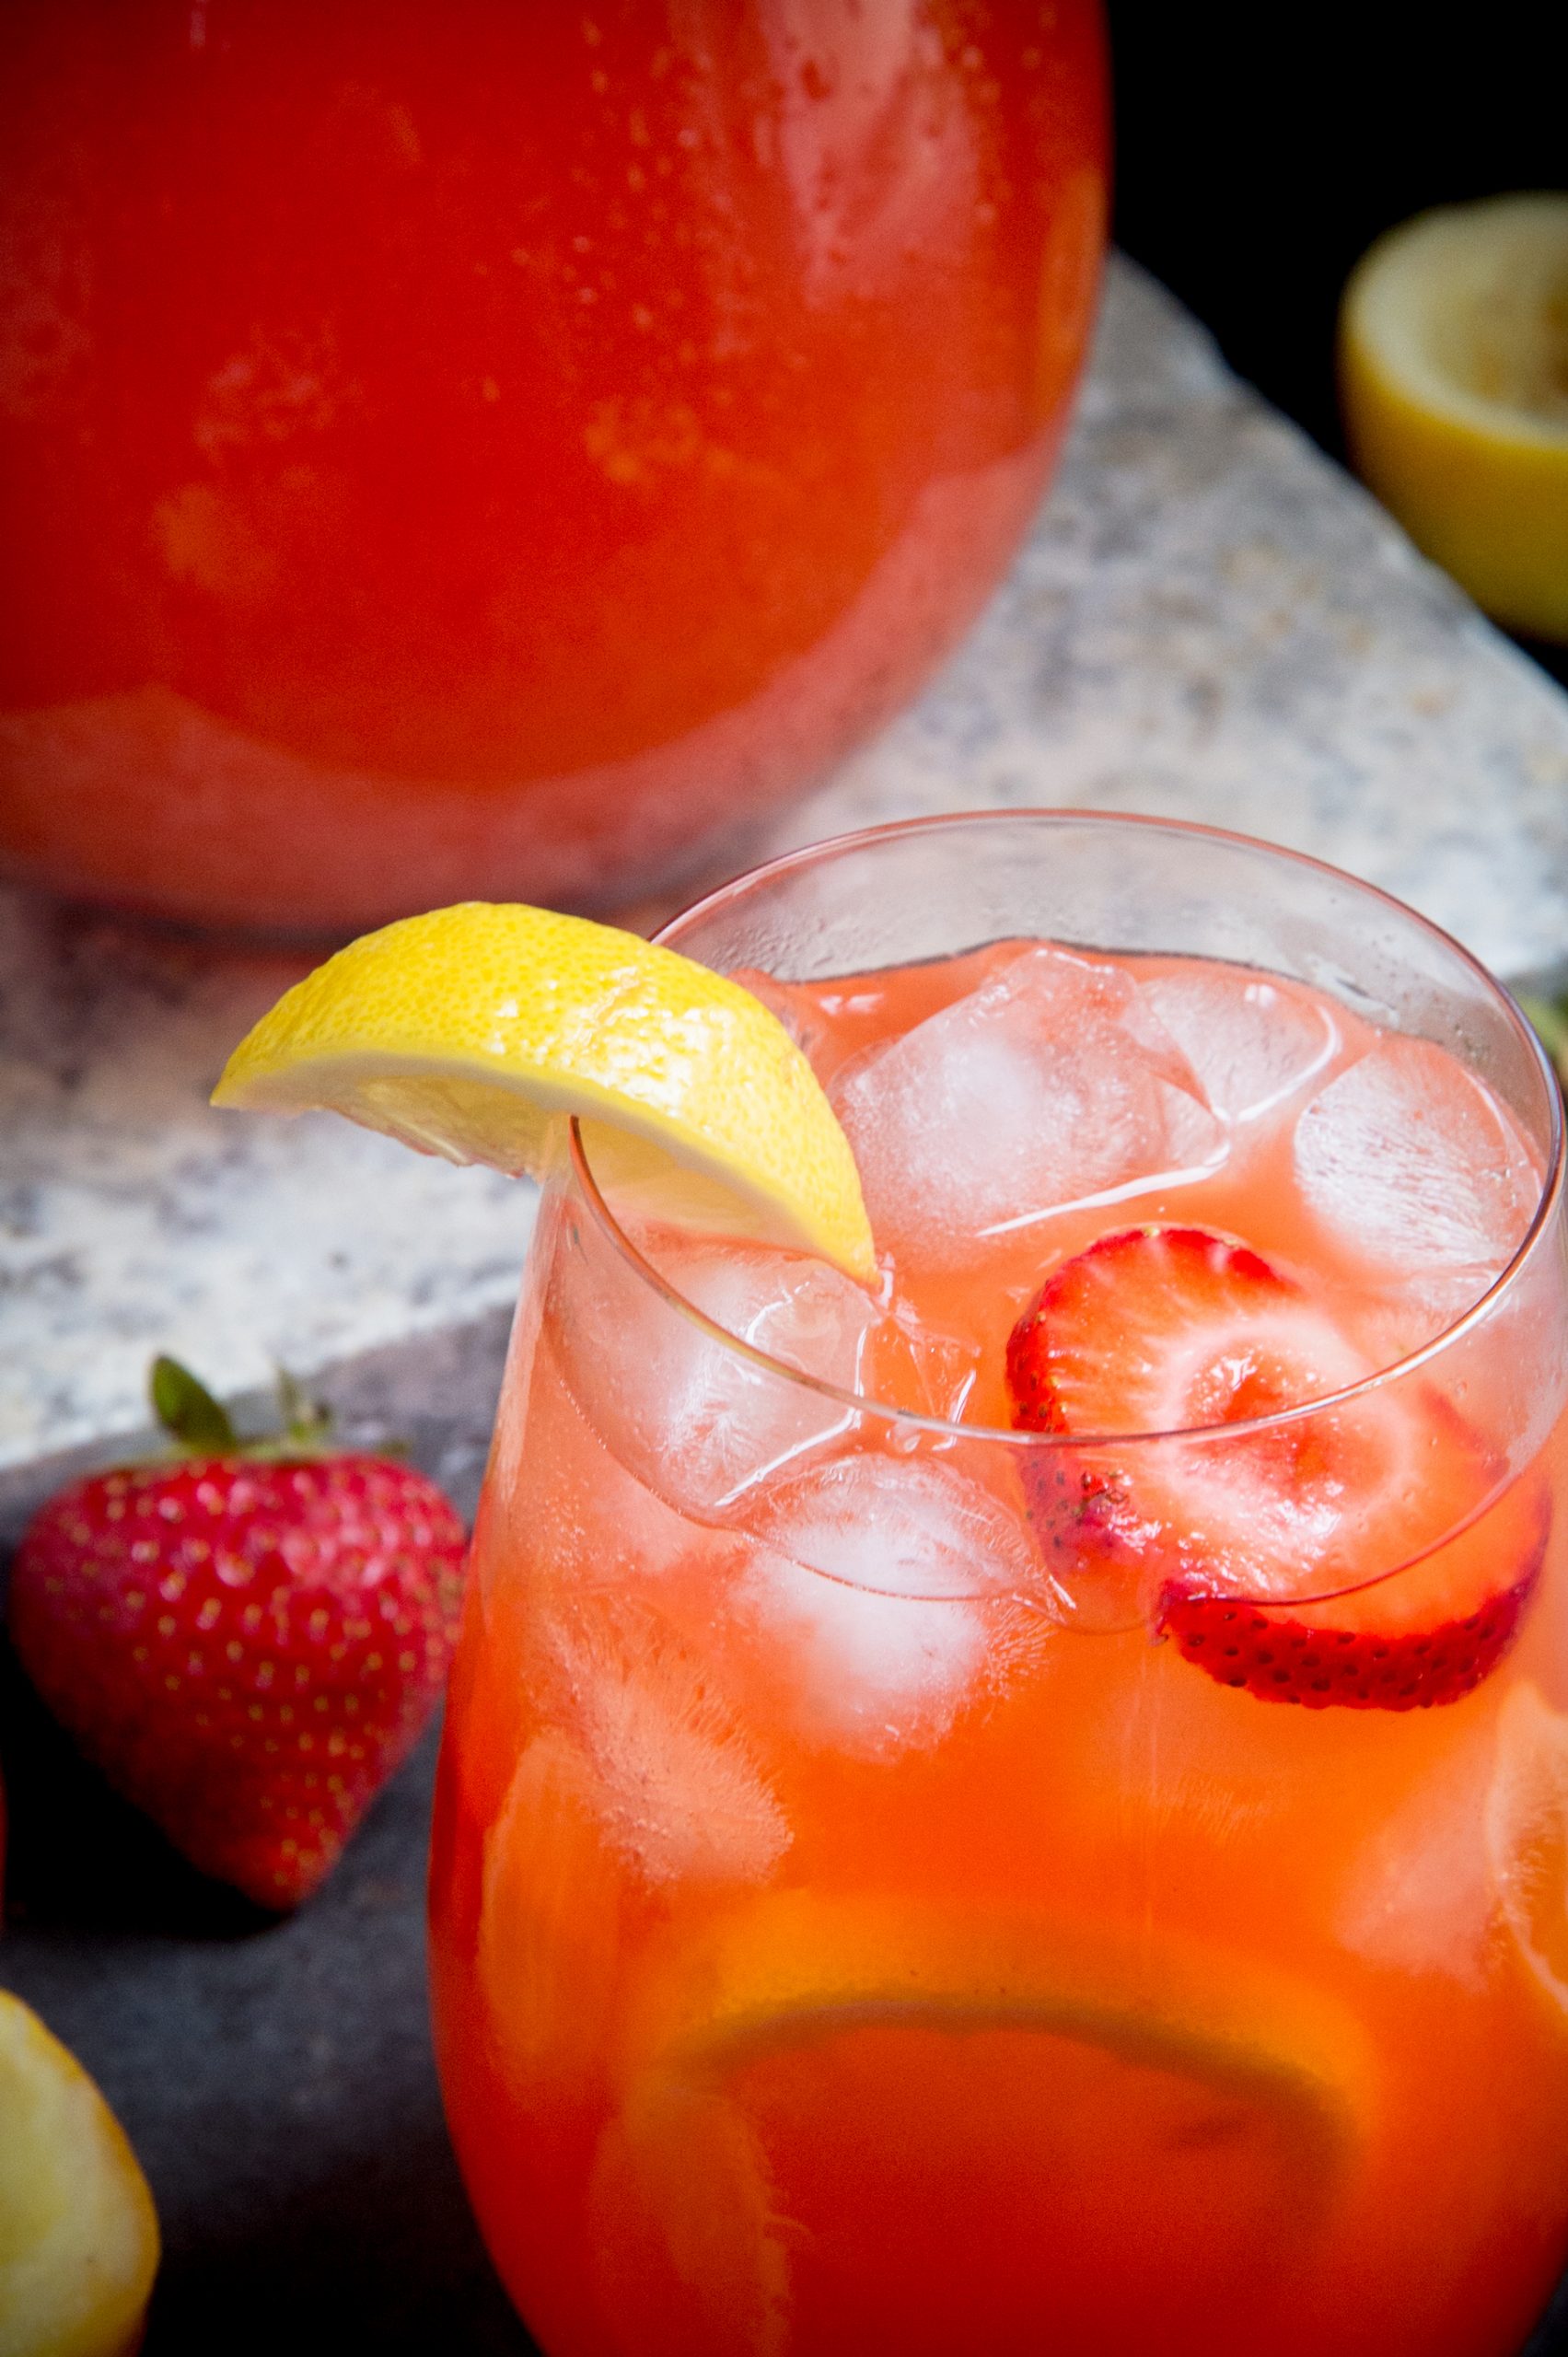 low-carb strawberry lemonade garnished with lemon slices and strawberries